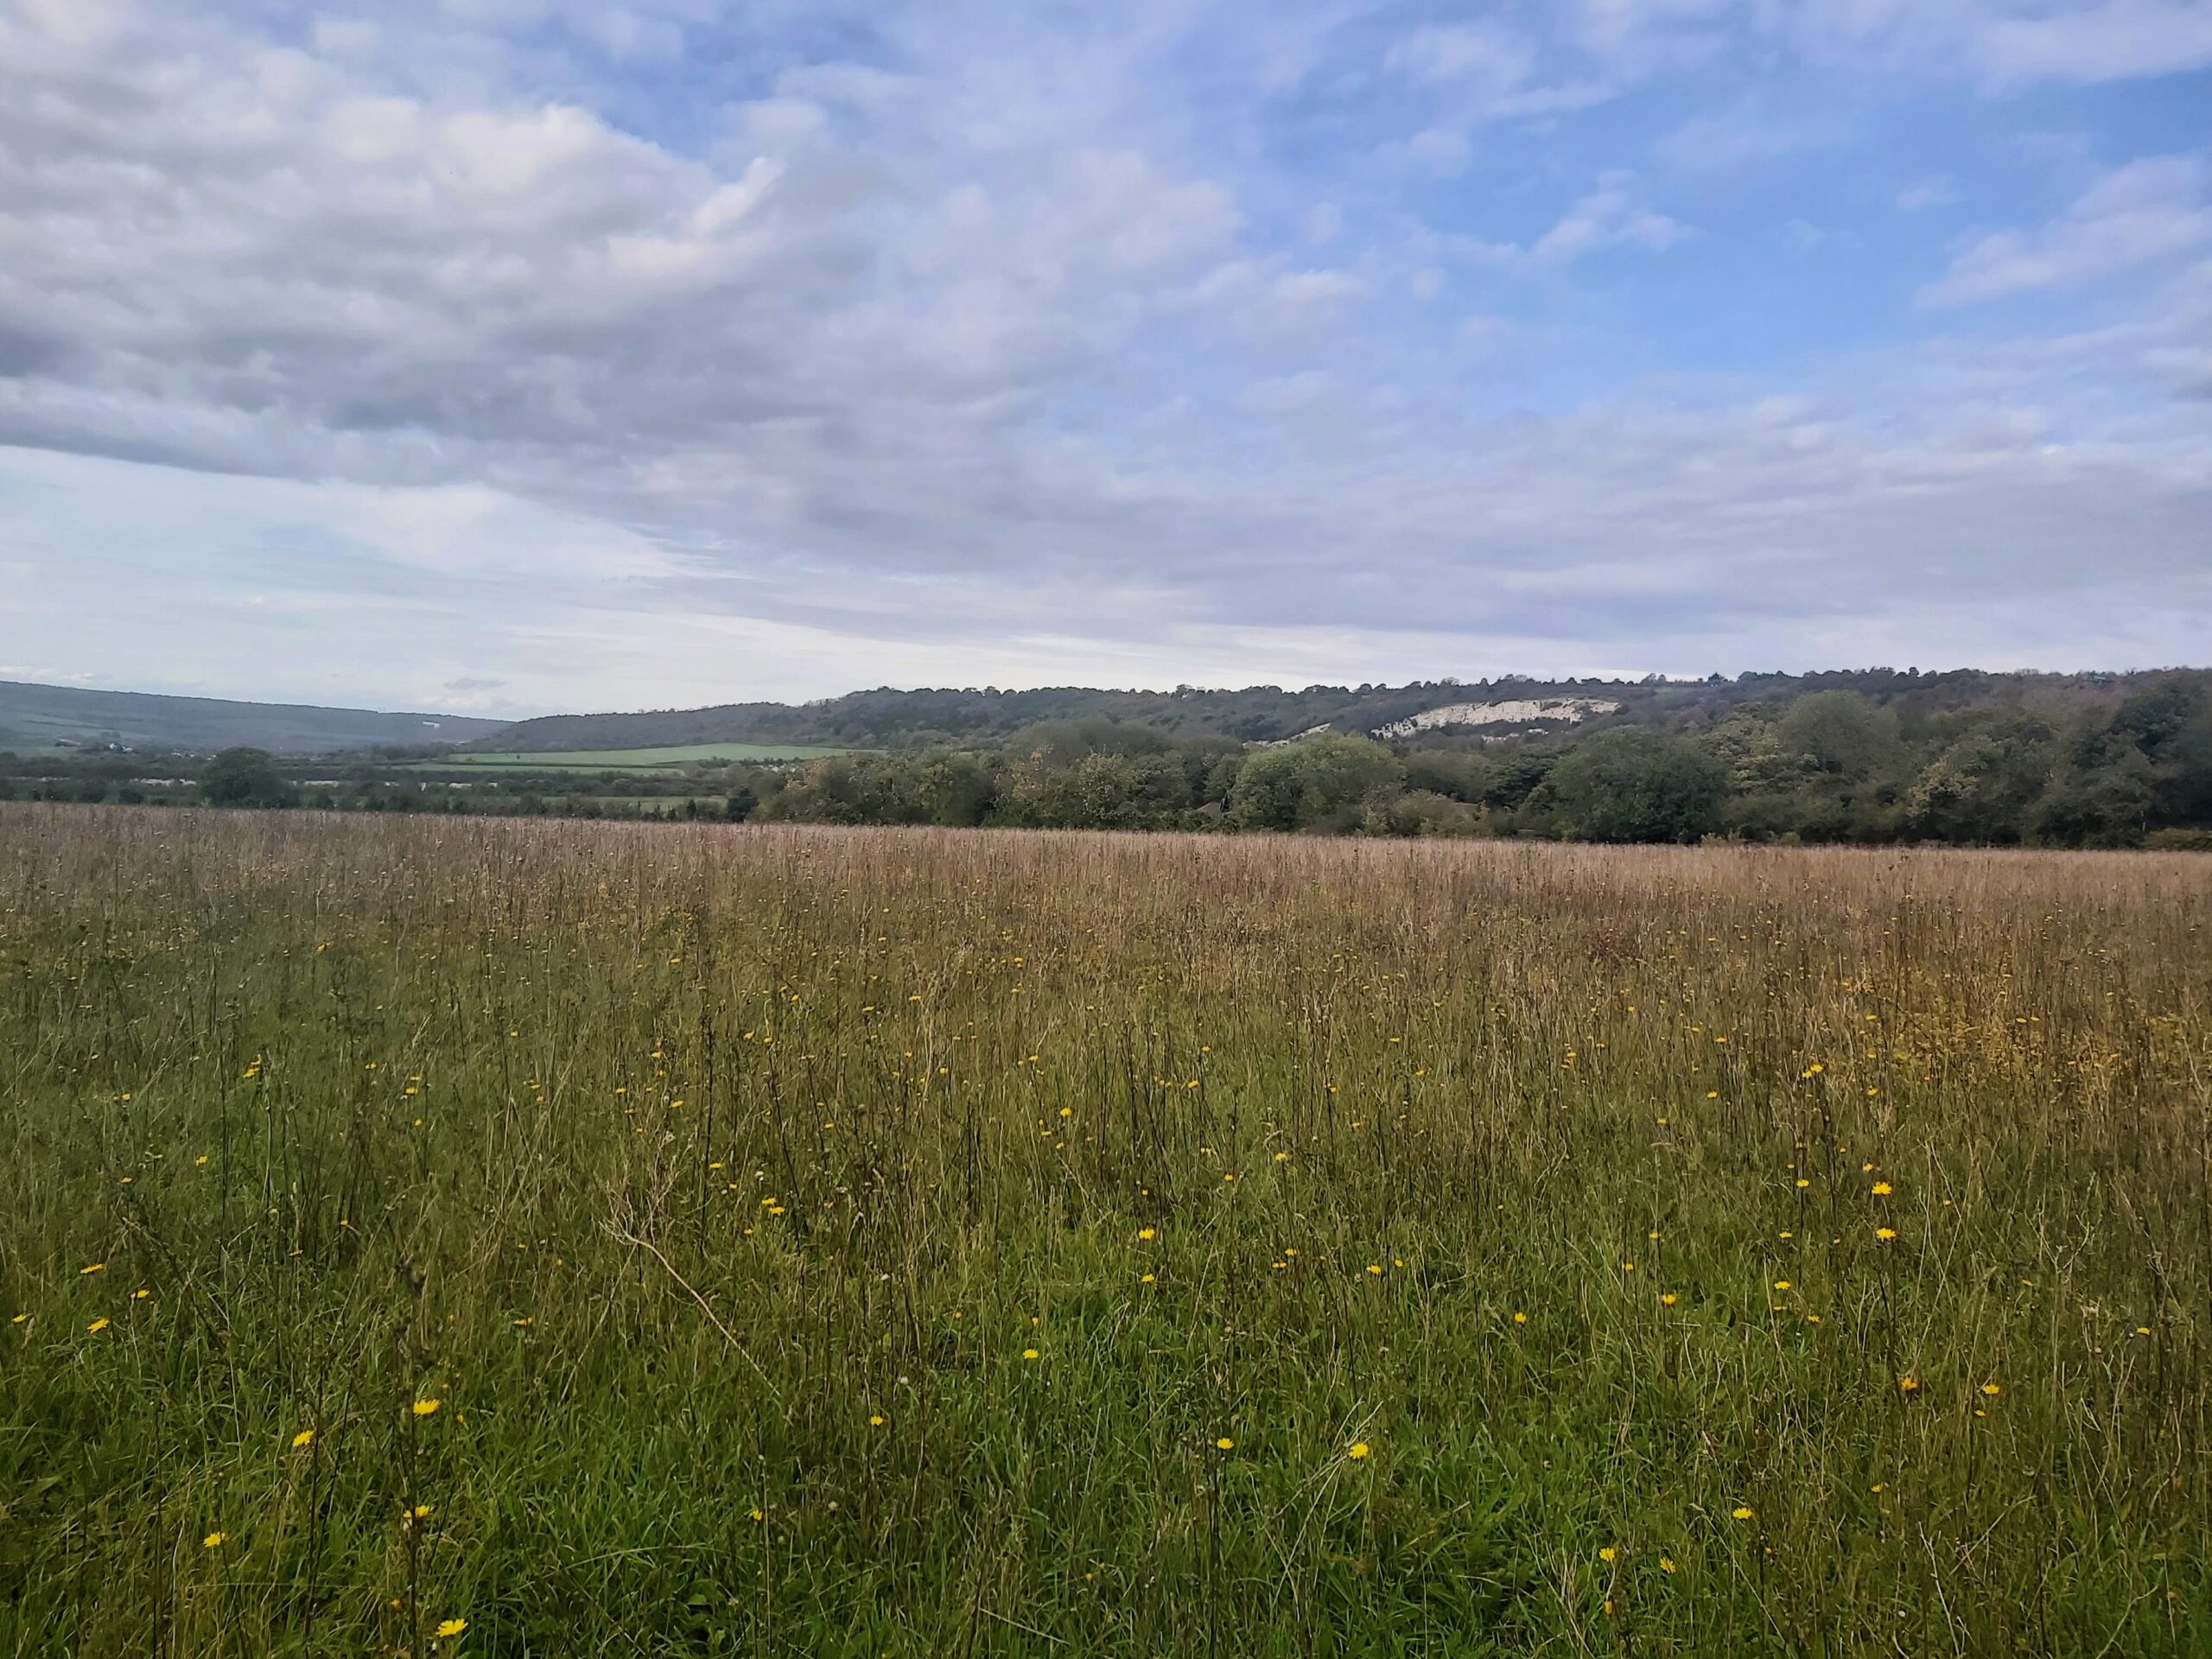 A field with far-reaching views at Aylesford, Kent, England.